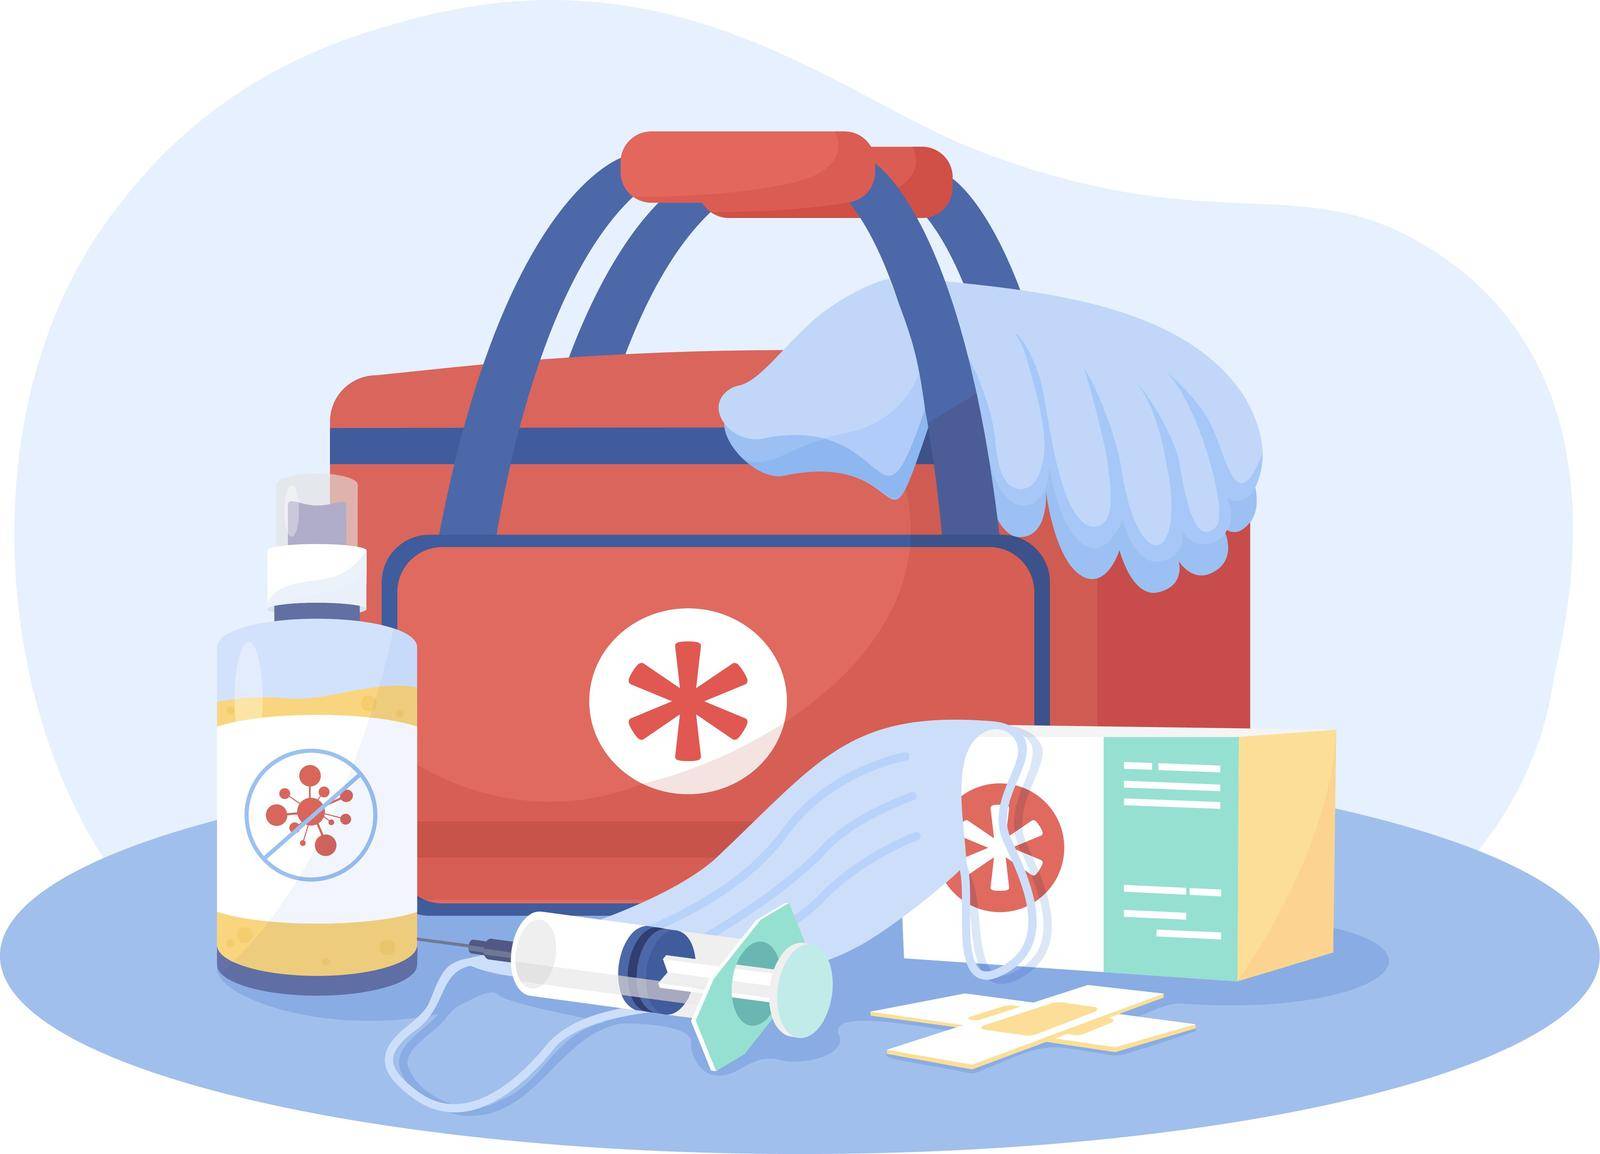 First aid kit 2D vector isolated illustration. Paramedic bag. Doctor supplies. Medical help equipment flat composition on cartoon background. Emergency situation assistance tools colourful scene